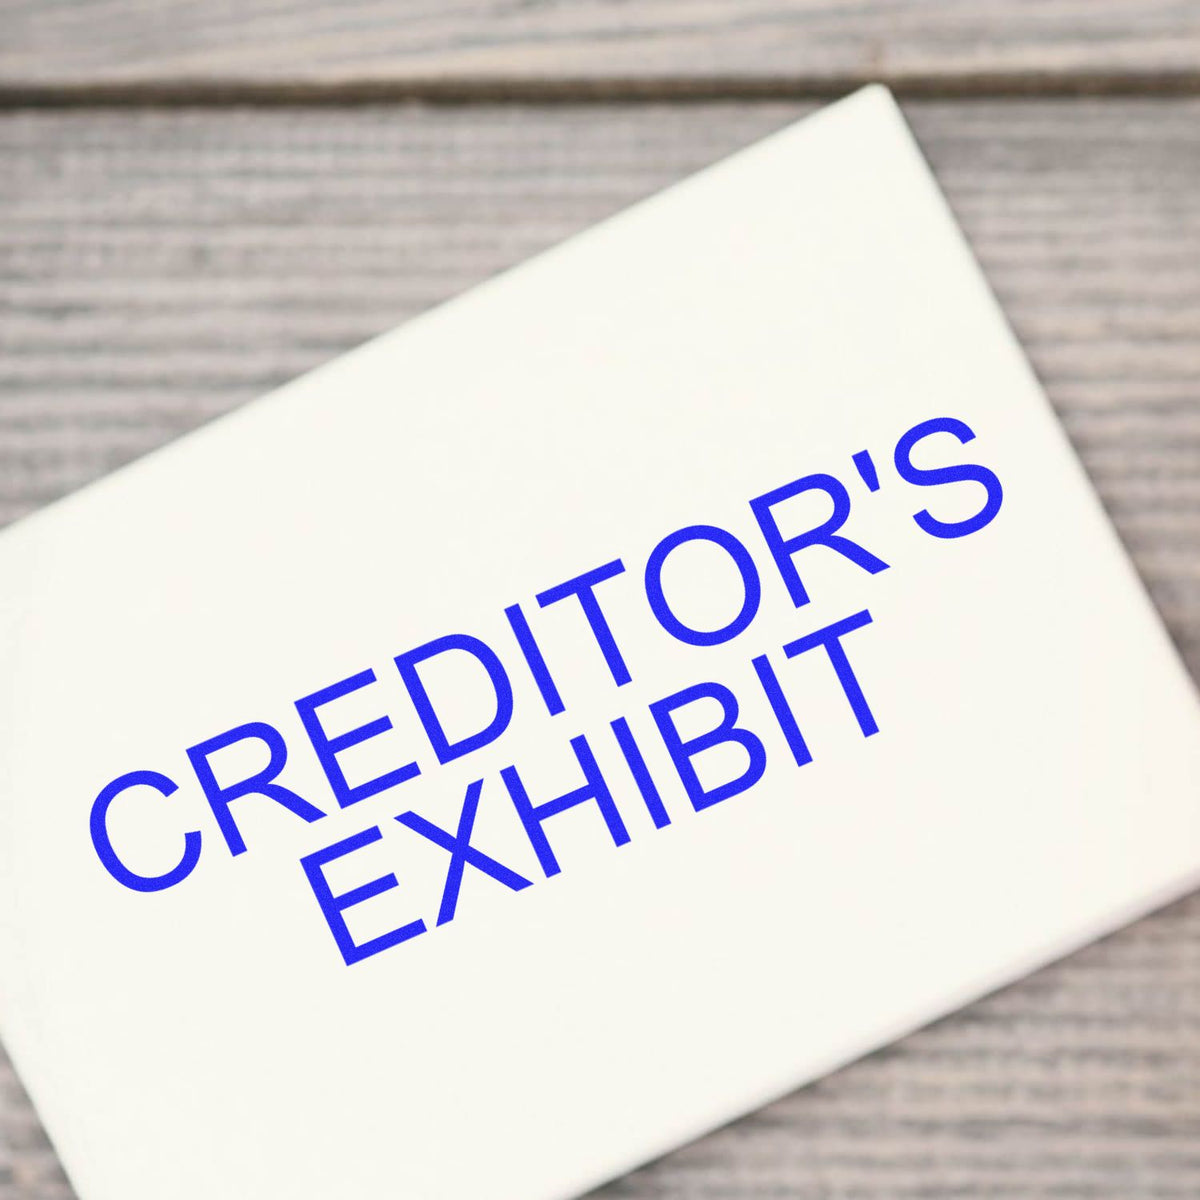 Creditors Exhibit Rubber Stamp In Use Photo